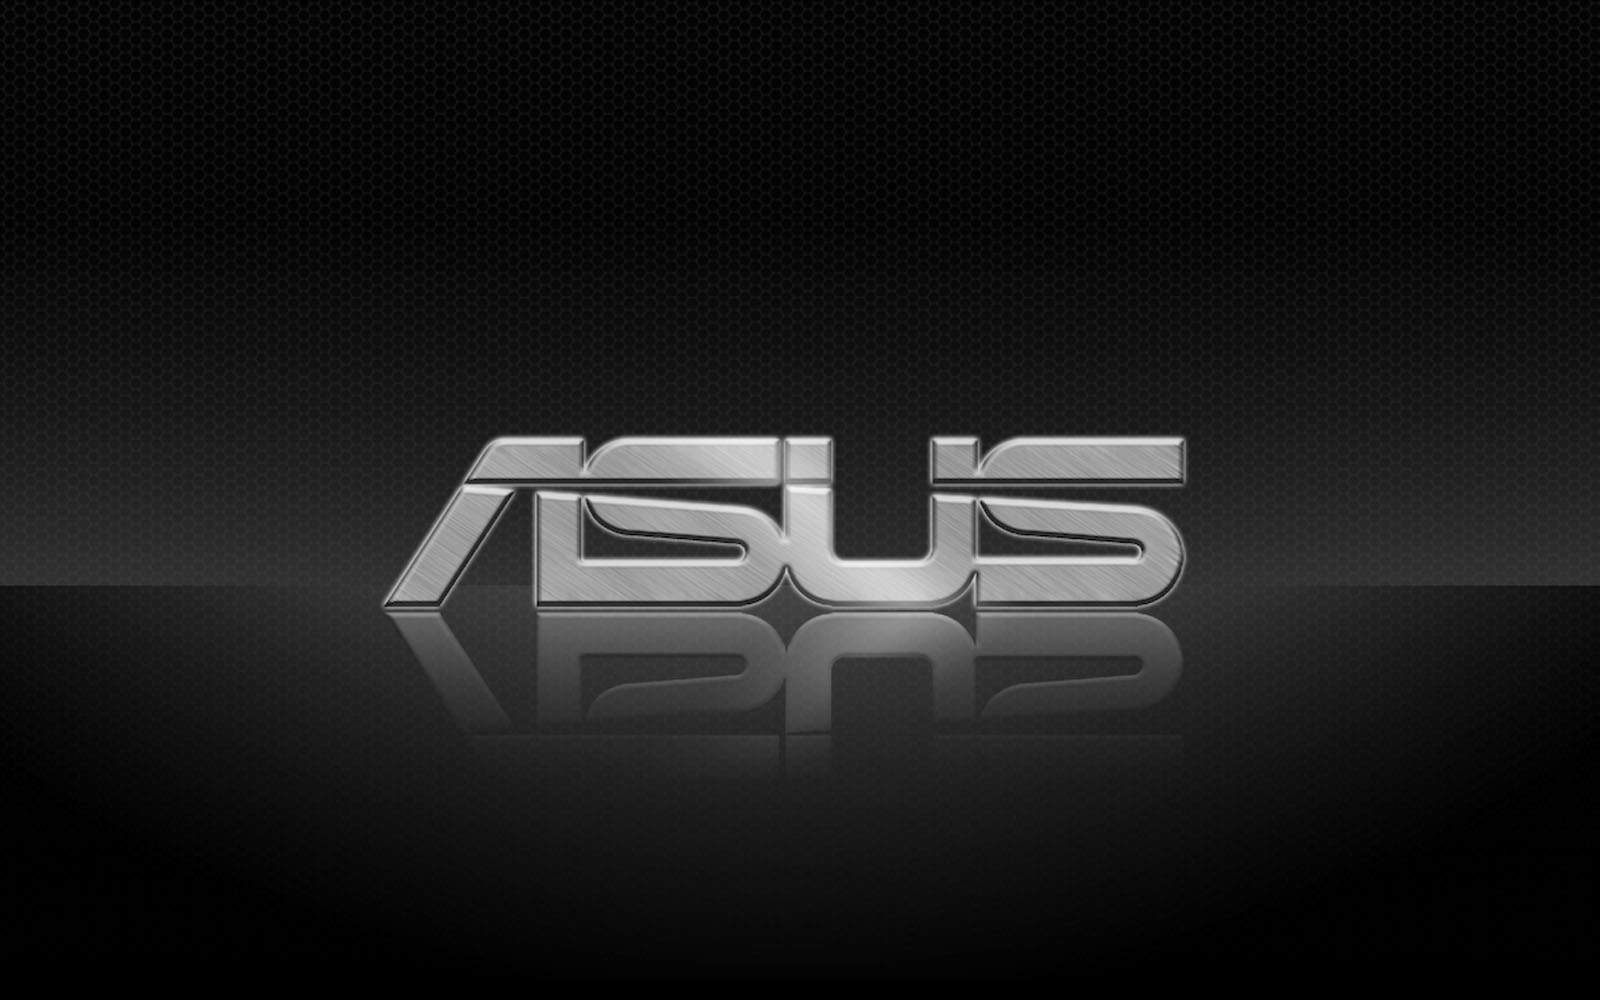  Asus Wallpapers Asus Desktop Wallpapers Asus Desktop Backgrounds